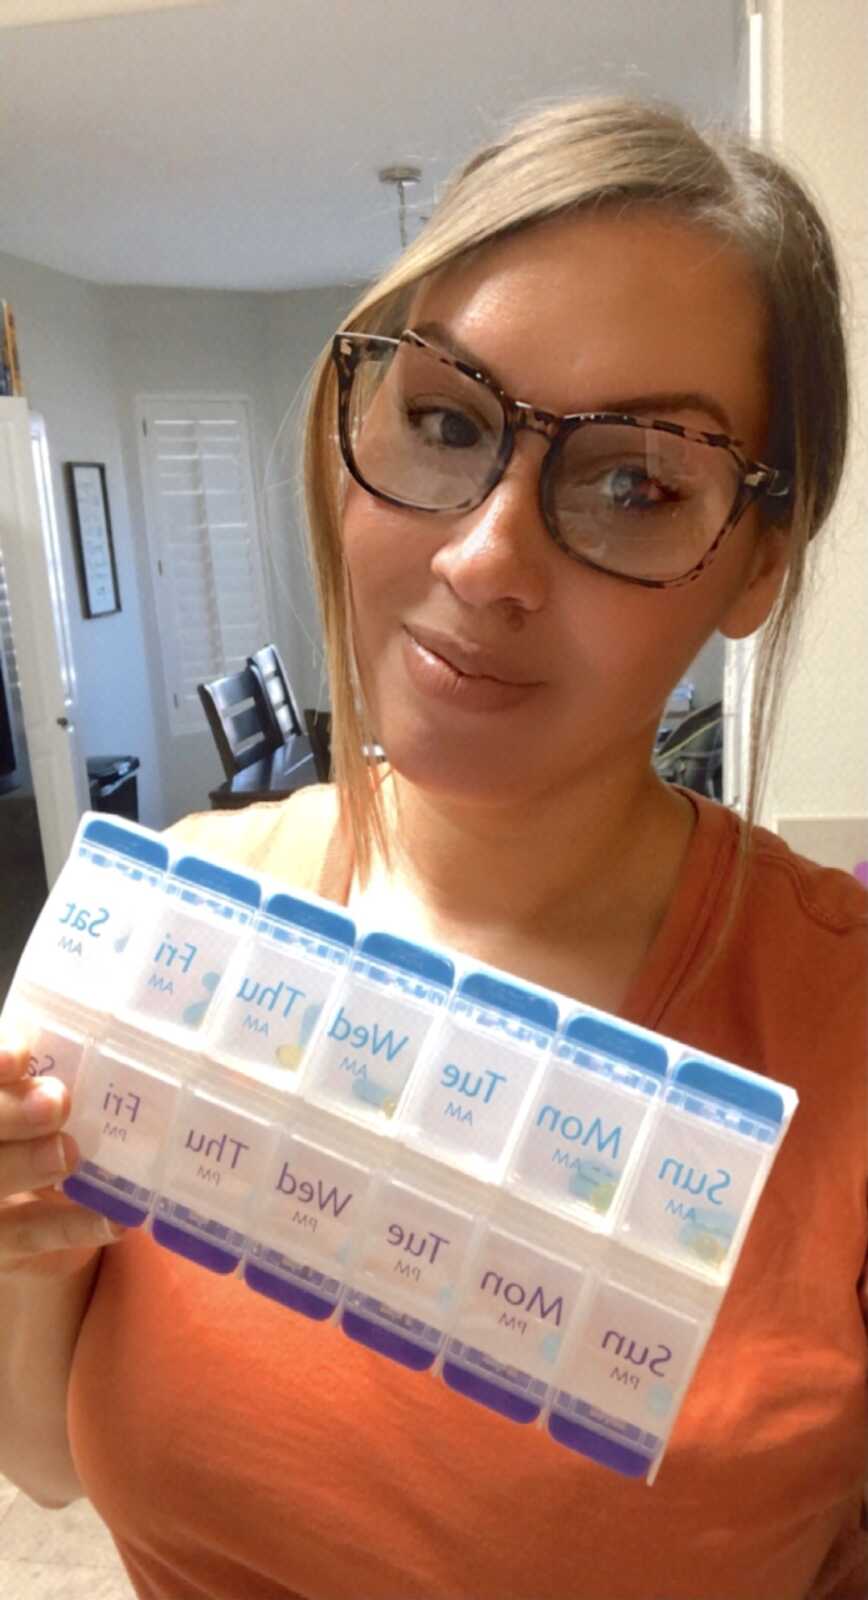 woman with chronic illness takes selfie while holding pill box